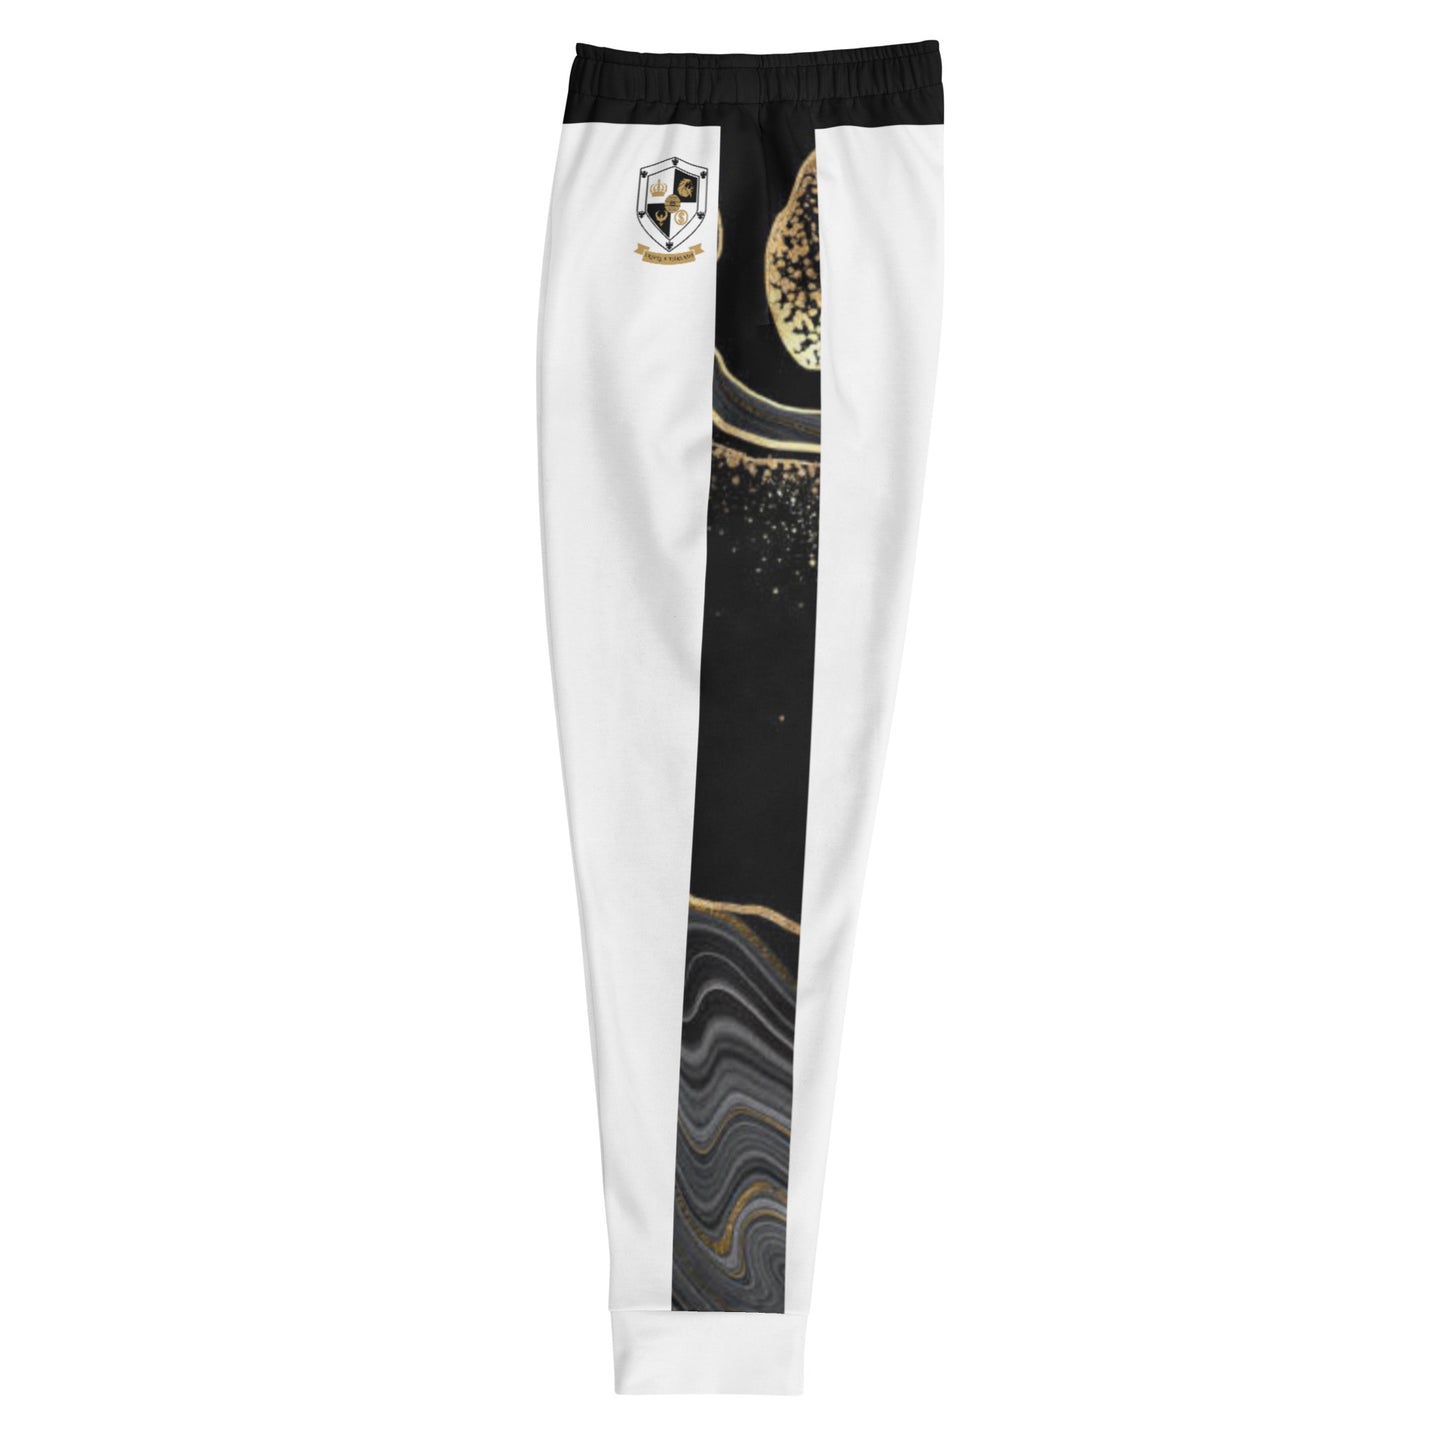 8xquiZit Collection T8T Deep Black N White Marble Men's Joggers - White